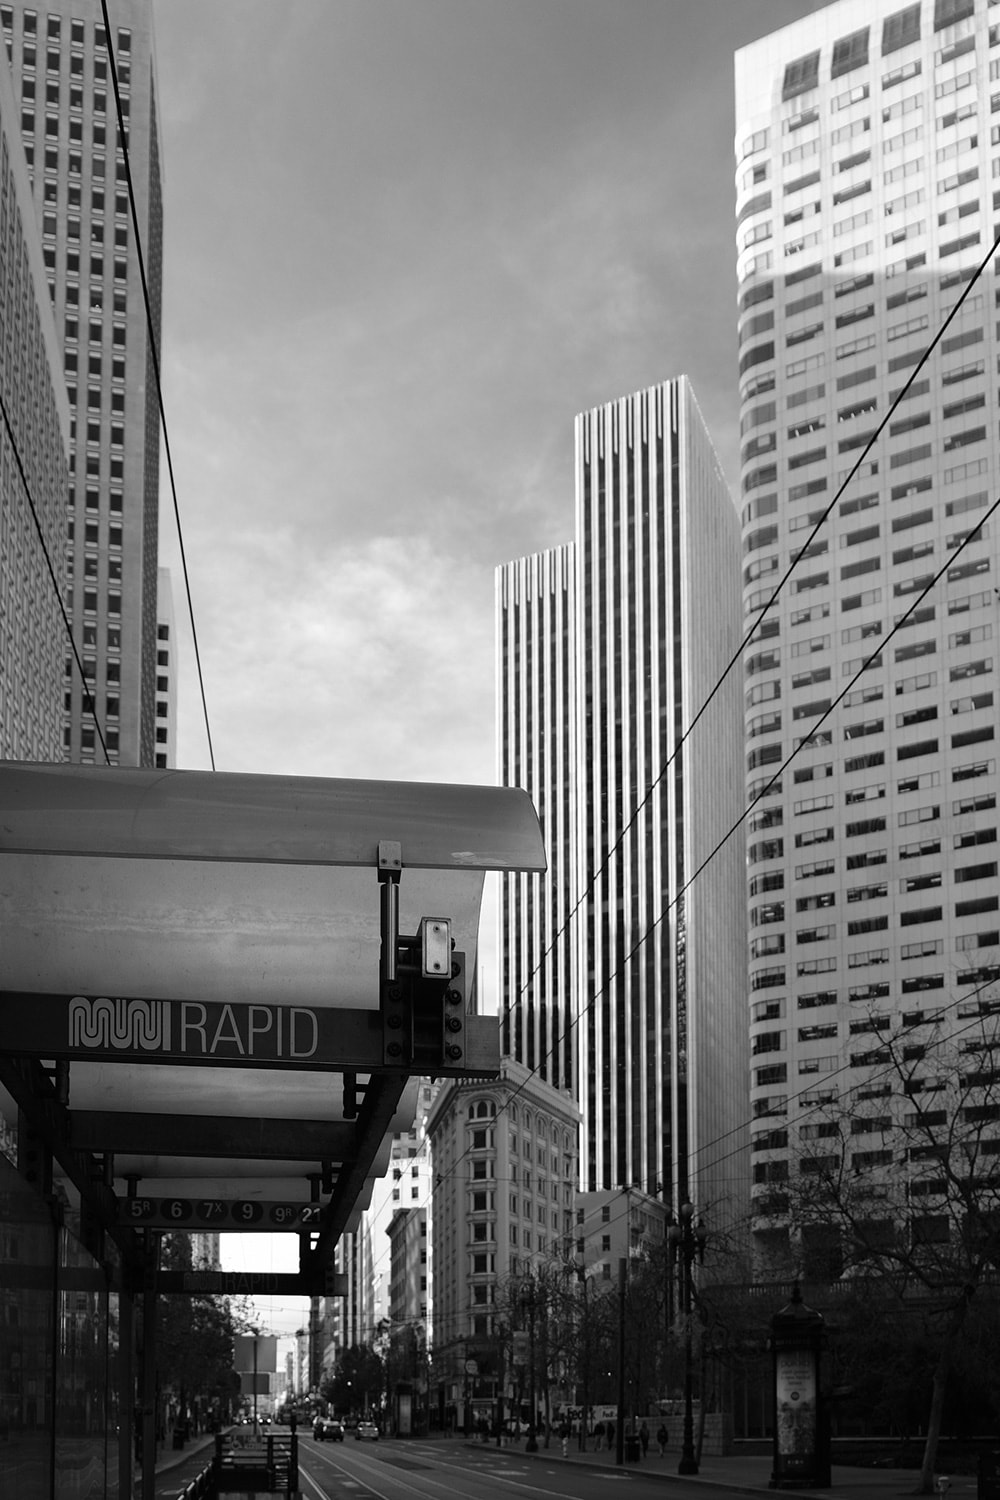 Black and white portrait photo of a MUNI bus stop on Market street surrounded by tall downtown buildings.